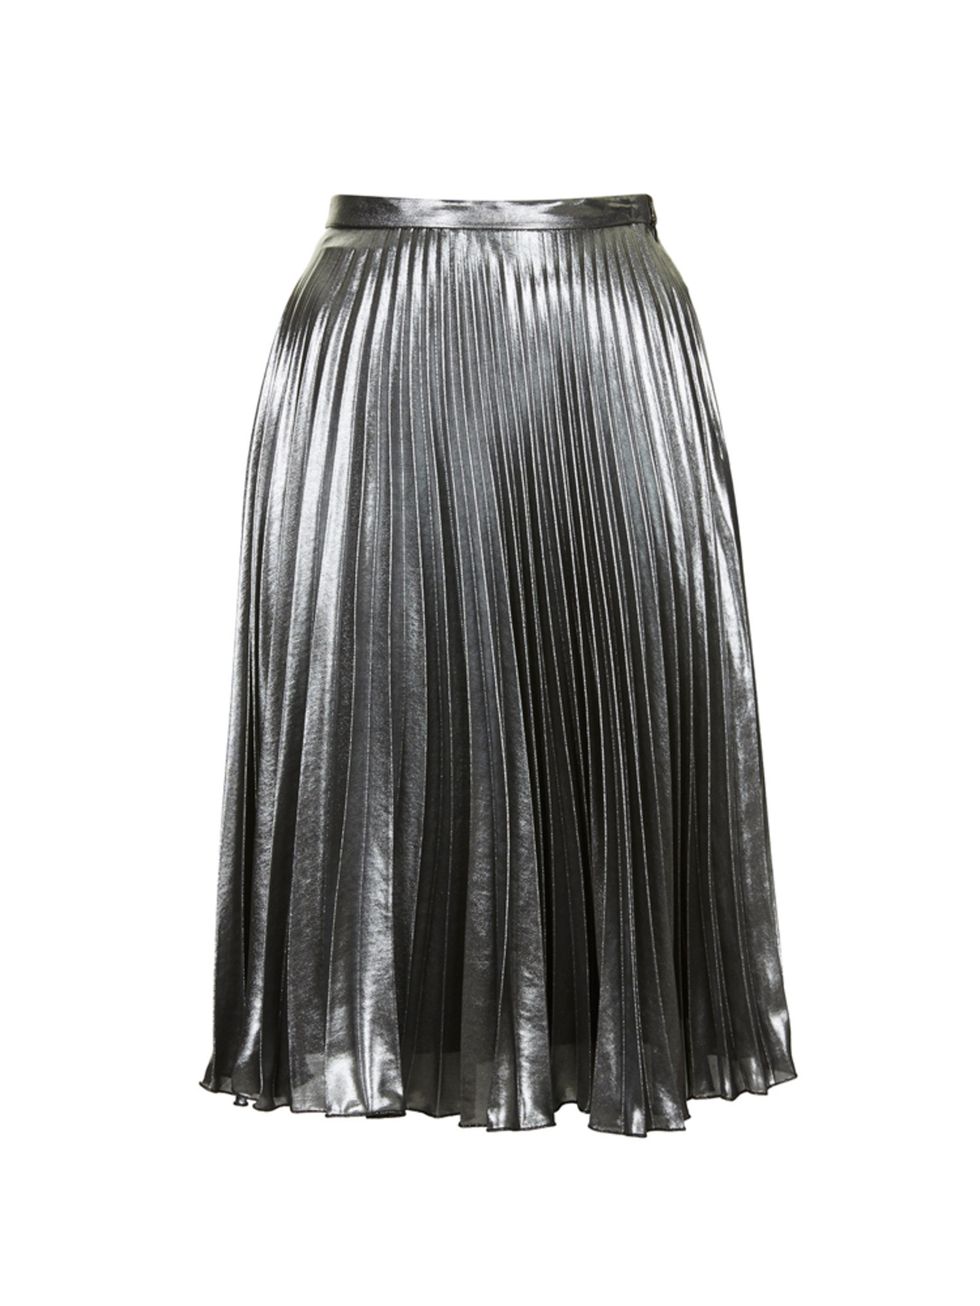 <p>Dress this skirt down in trainers and a sweatshirt for work then add some oompf with heels and a slinky tee.</p>

<p><a href="http://www.topshop.com/webapp/wcs/stores/servlet/ProductDisplay?searchTerm=metallic&storeId=12556&productId=17839157&urlReques